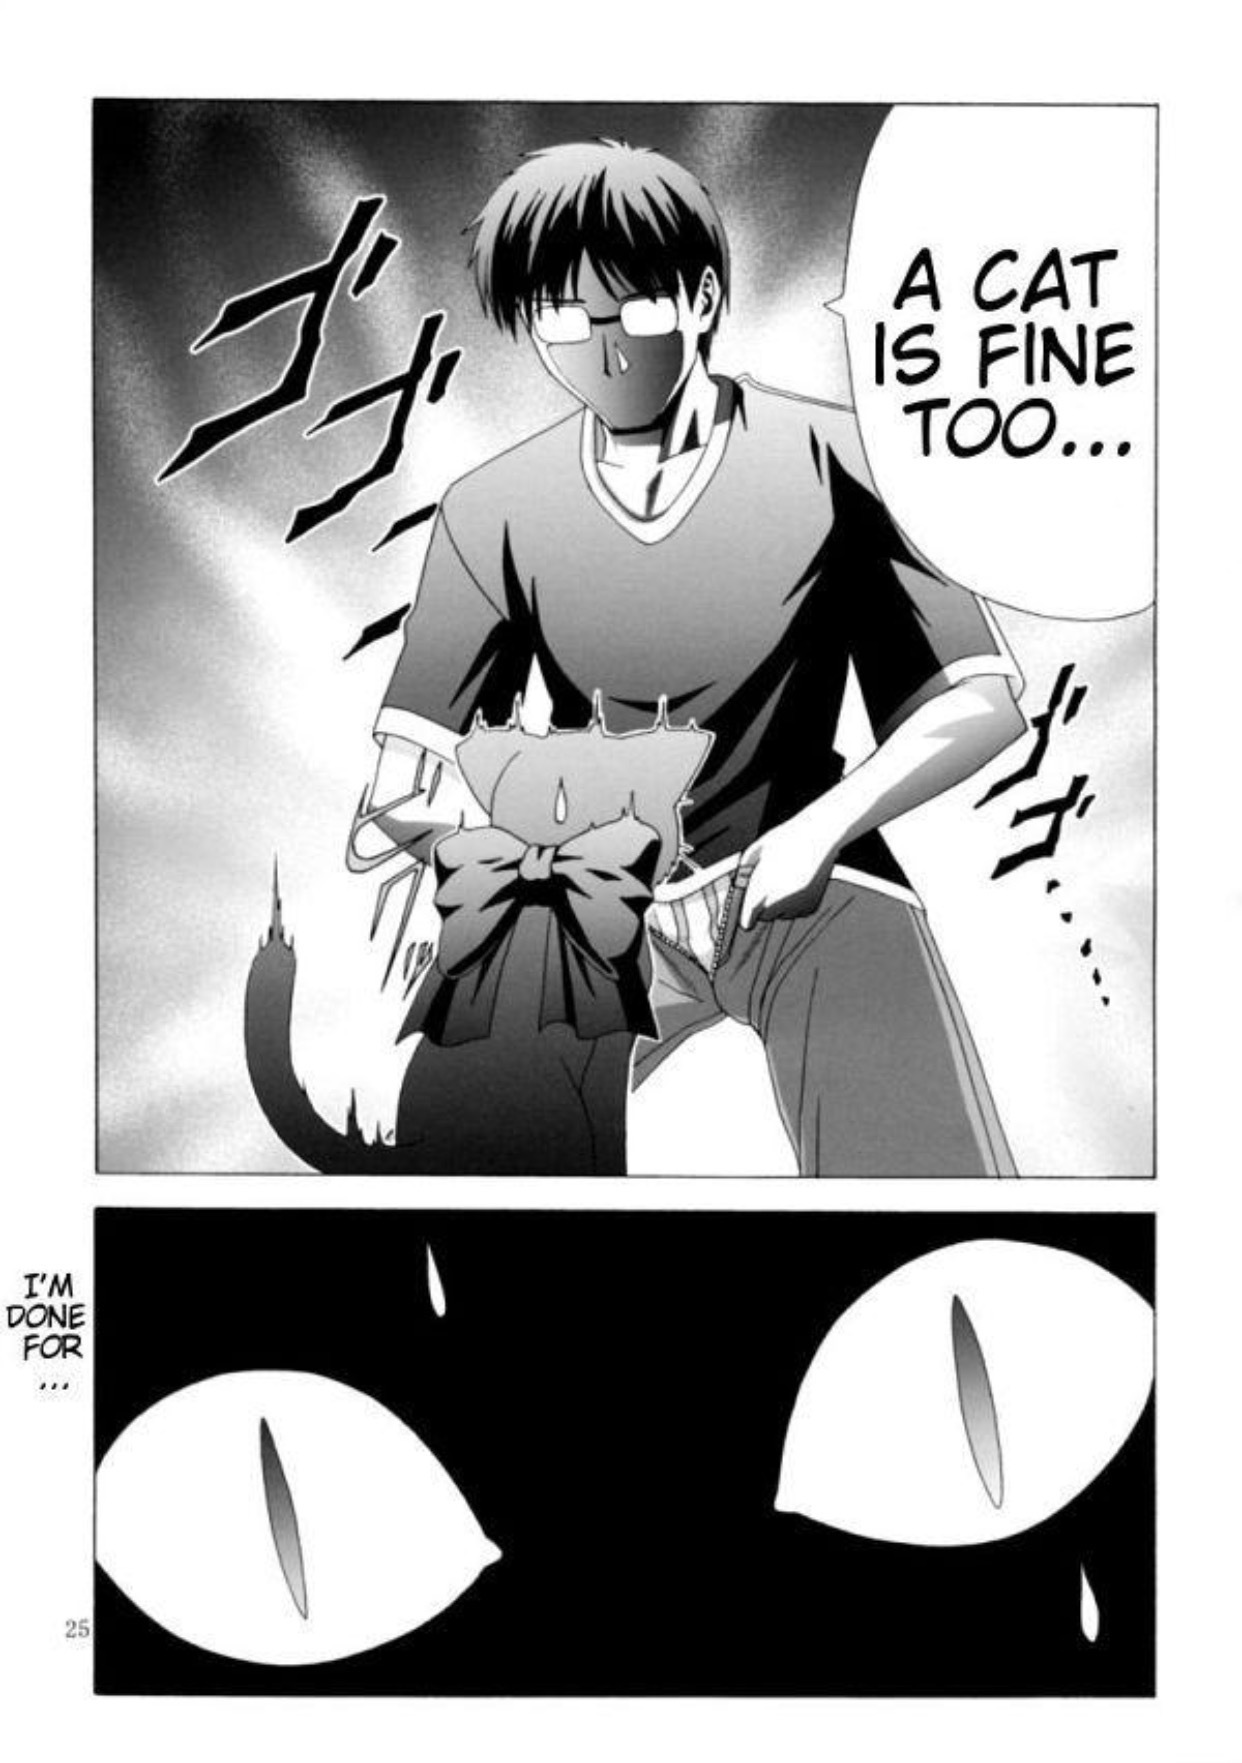 1 this is a cat. A Cat is Fine too. Cat is Fine too Мем. A Cat is Fine too Манга. Tsukihime Cat is Fine too.